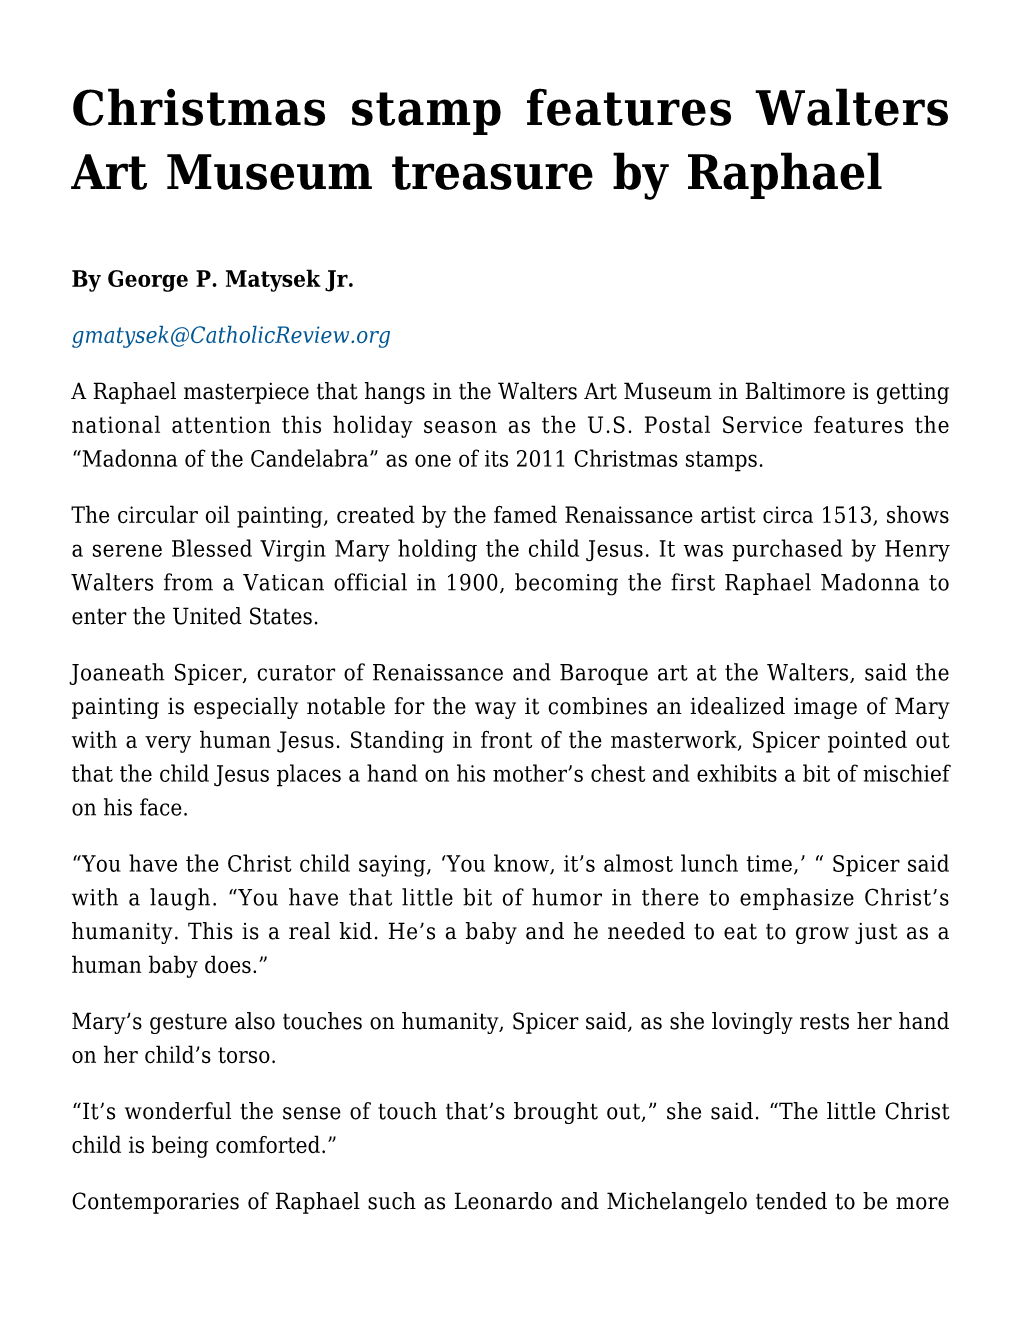 Christmas Stamp Features Walters Art Museum Treasure by Raphael